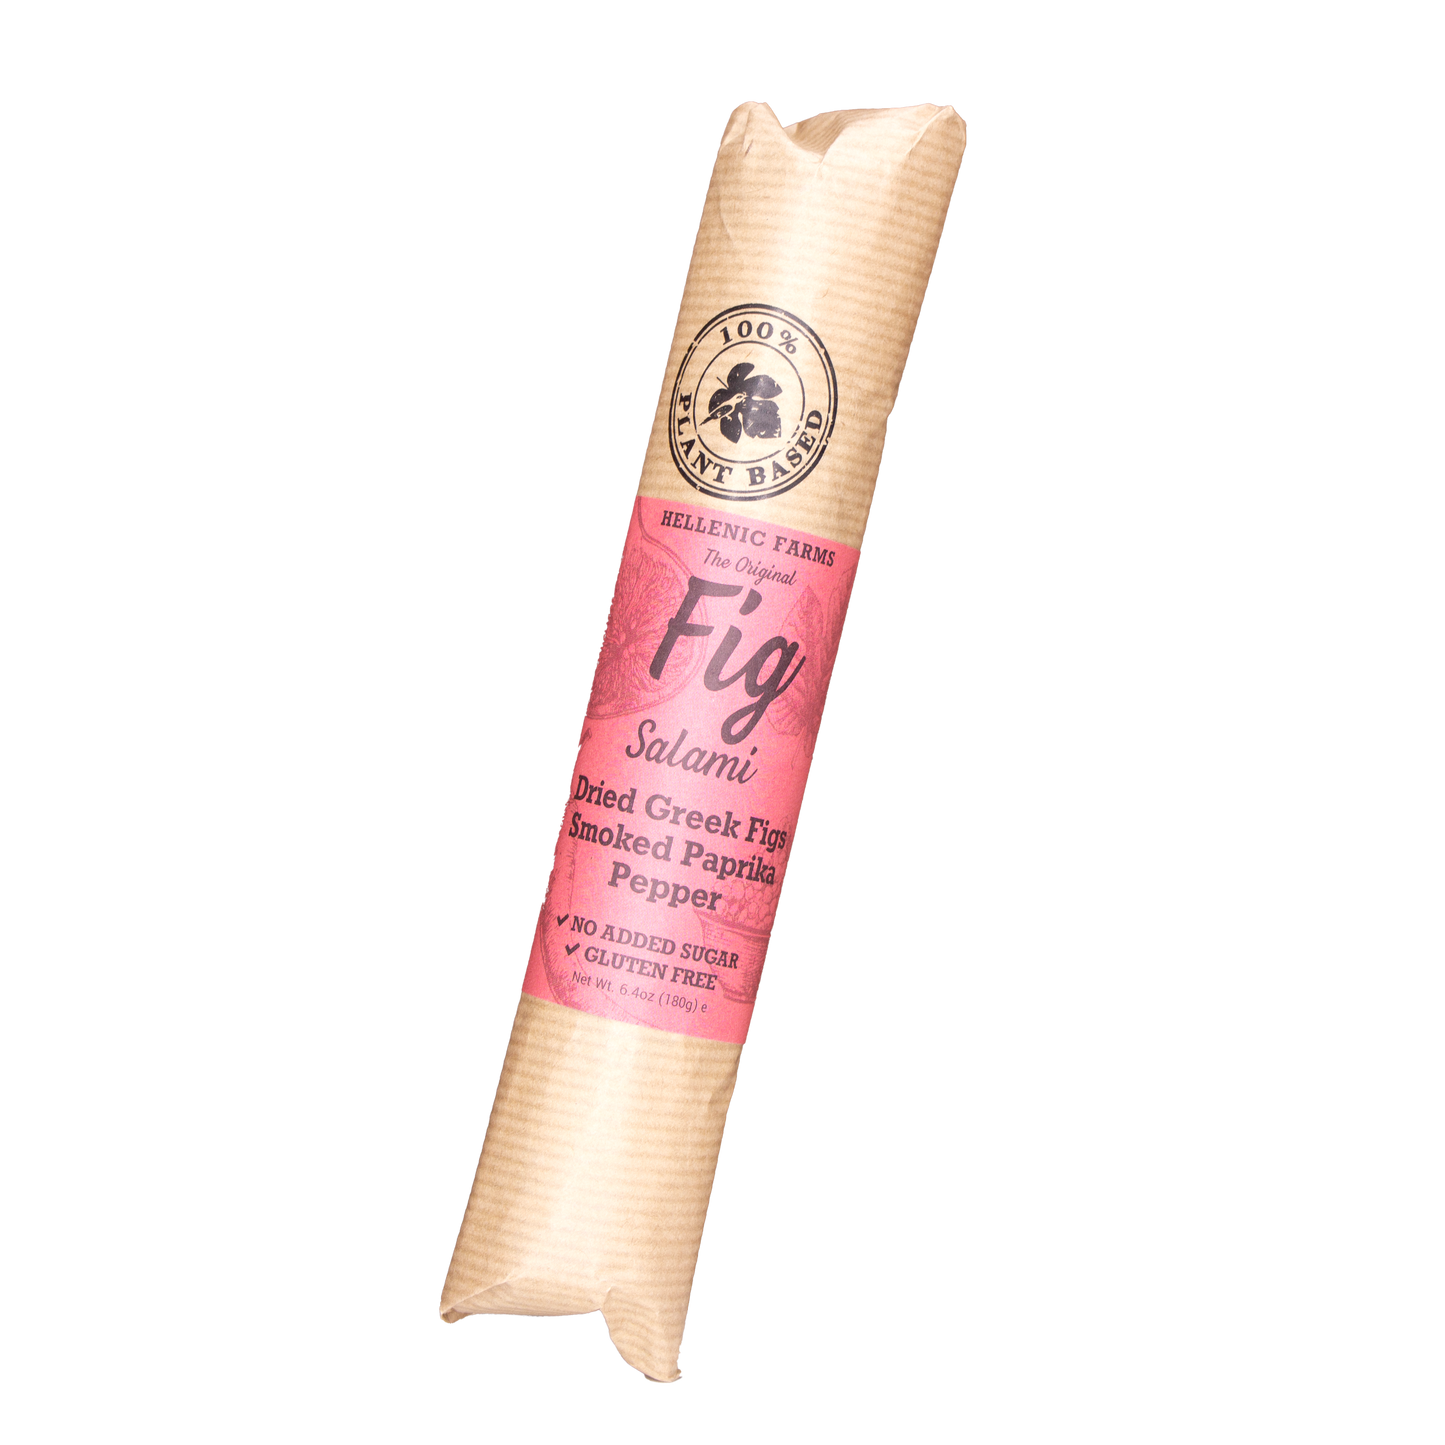 Hellenic Farms - Fig Salami with Dried Greek Figs Smoked Paprika Pepper